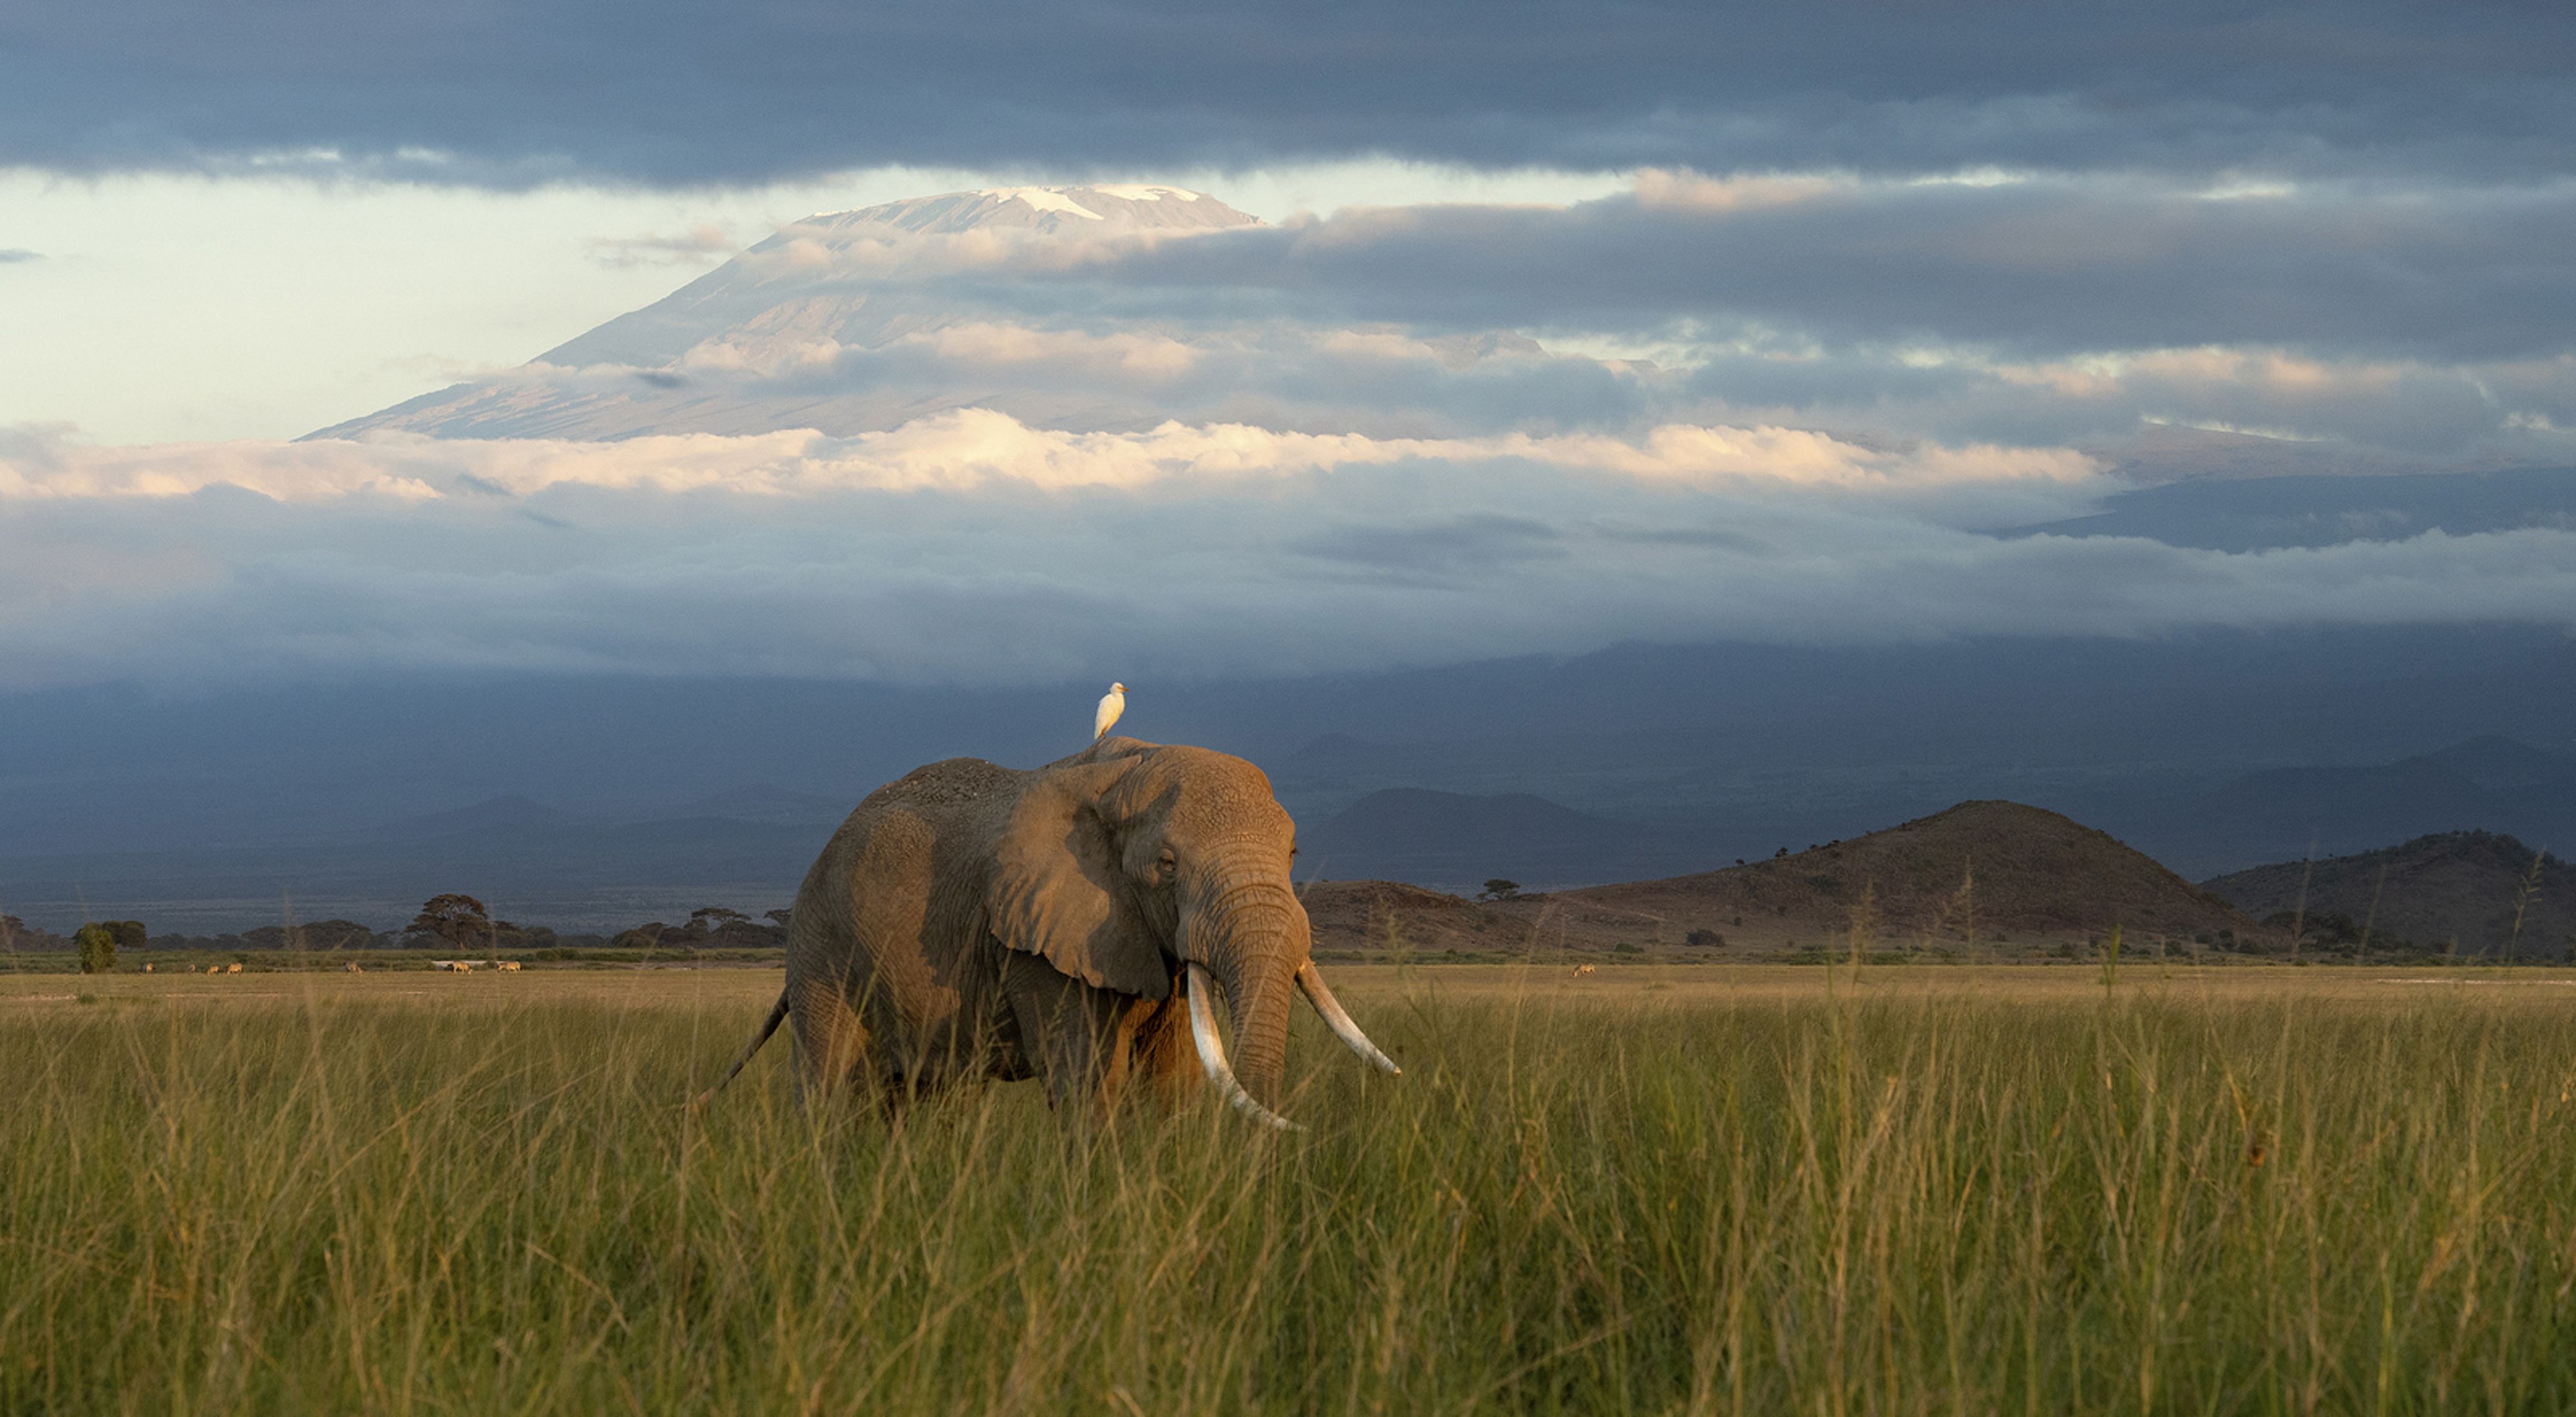 Elephant walking through field with Kilimanjaro in background